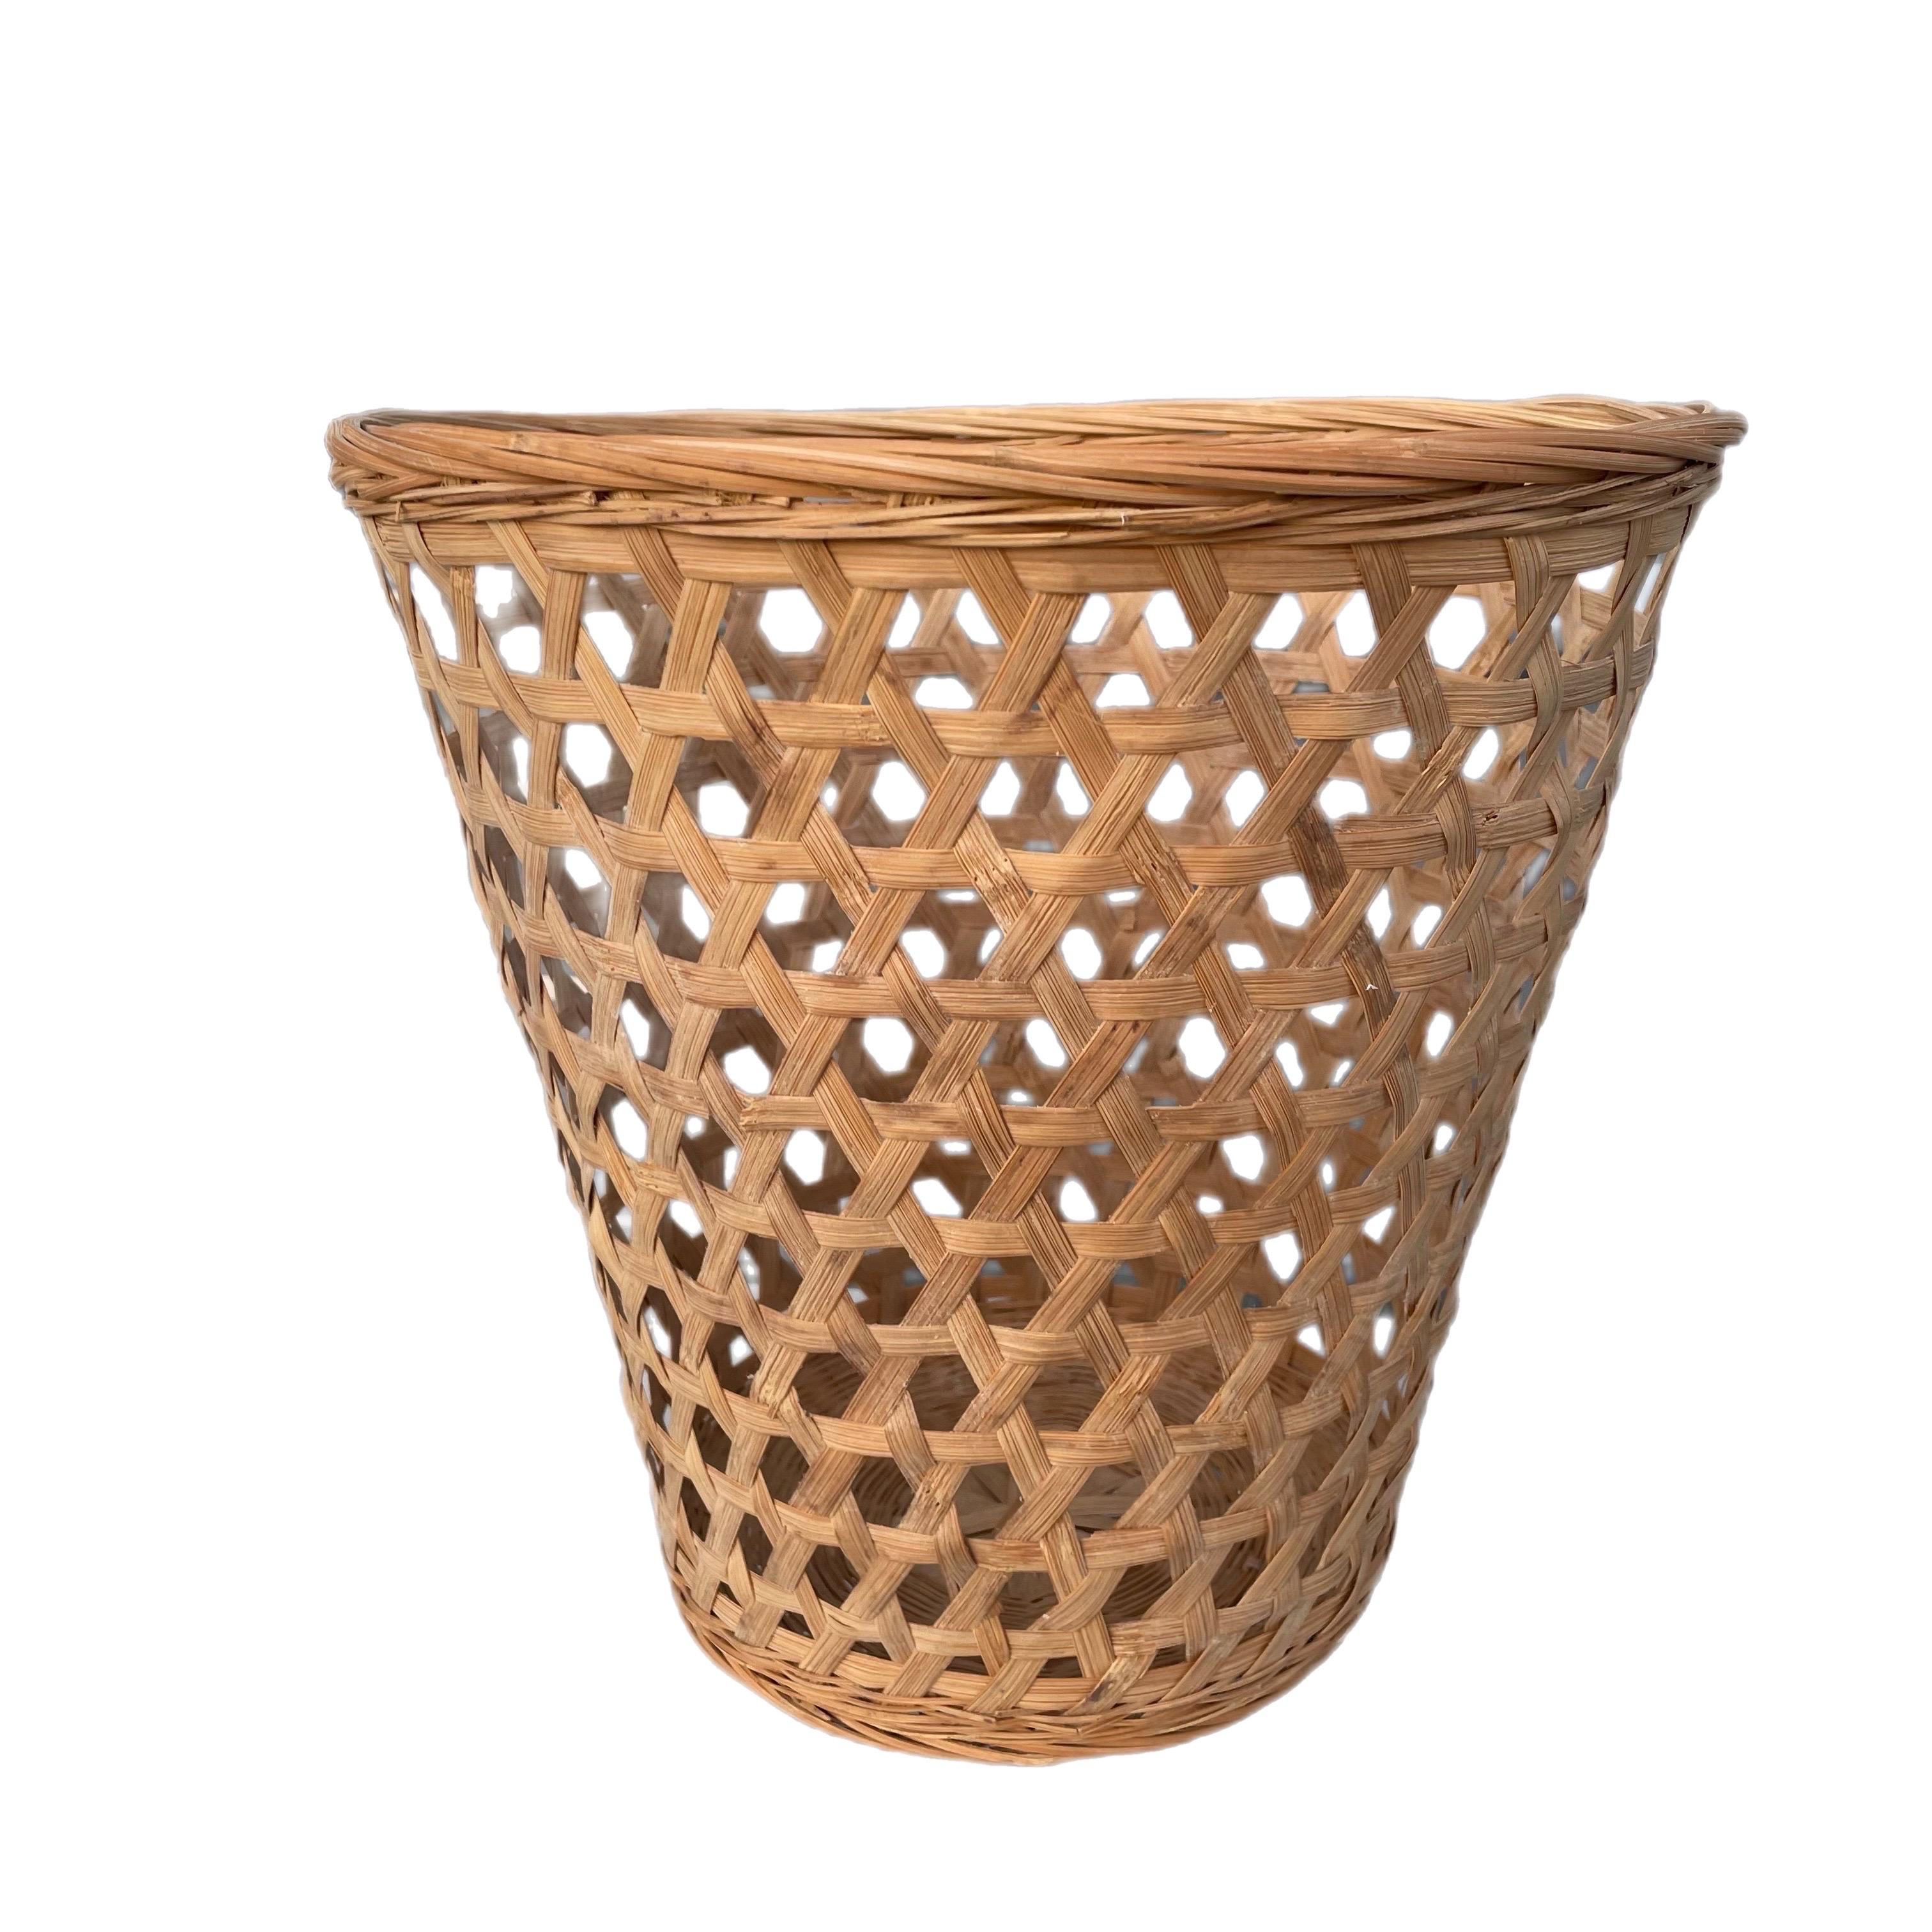 Hand-Woven 20th Century Open Weave Wicker Wastebasket or Trash Can For Sale